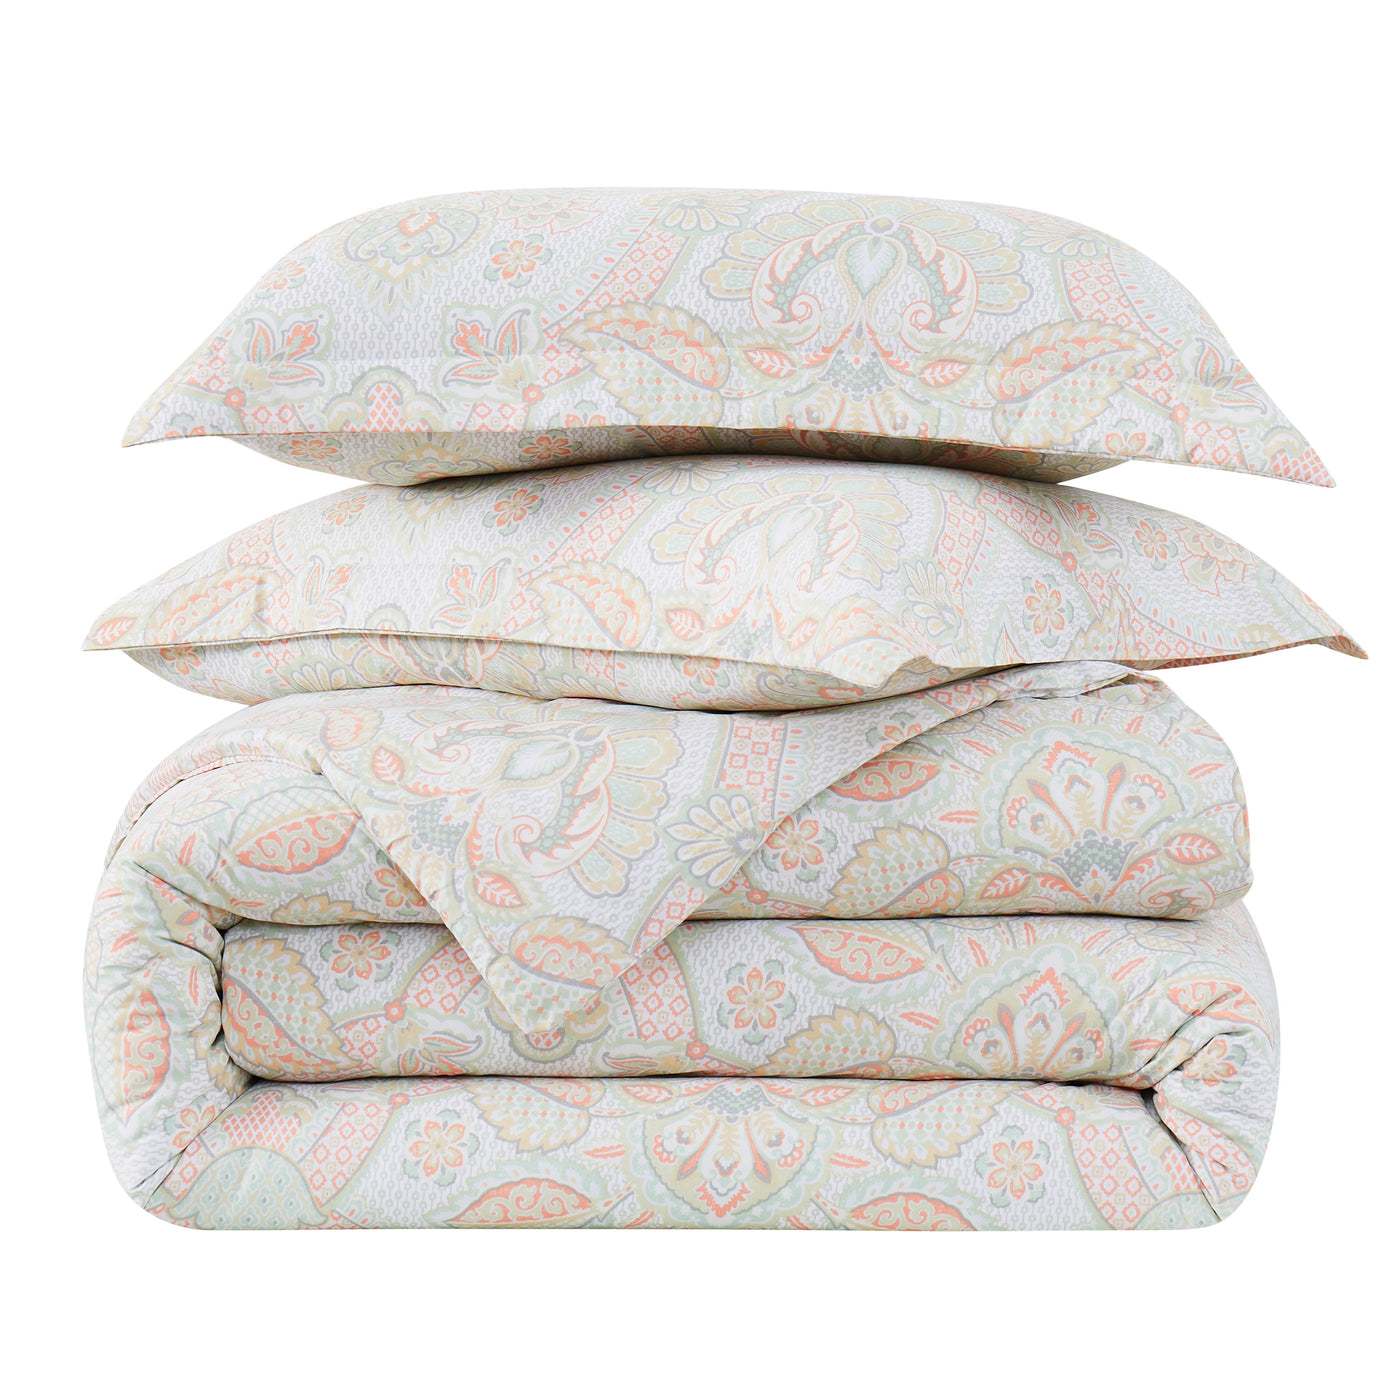 Stack Image of Enchantment Comforter Set in coral#color_enchantment-coral